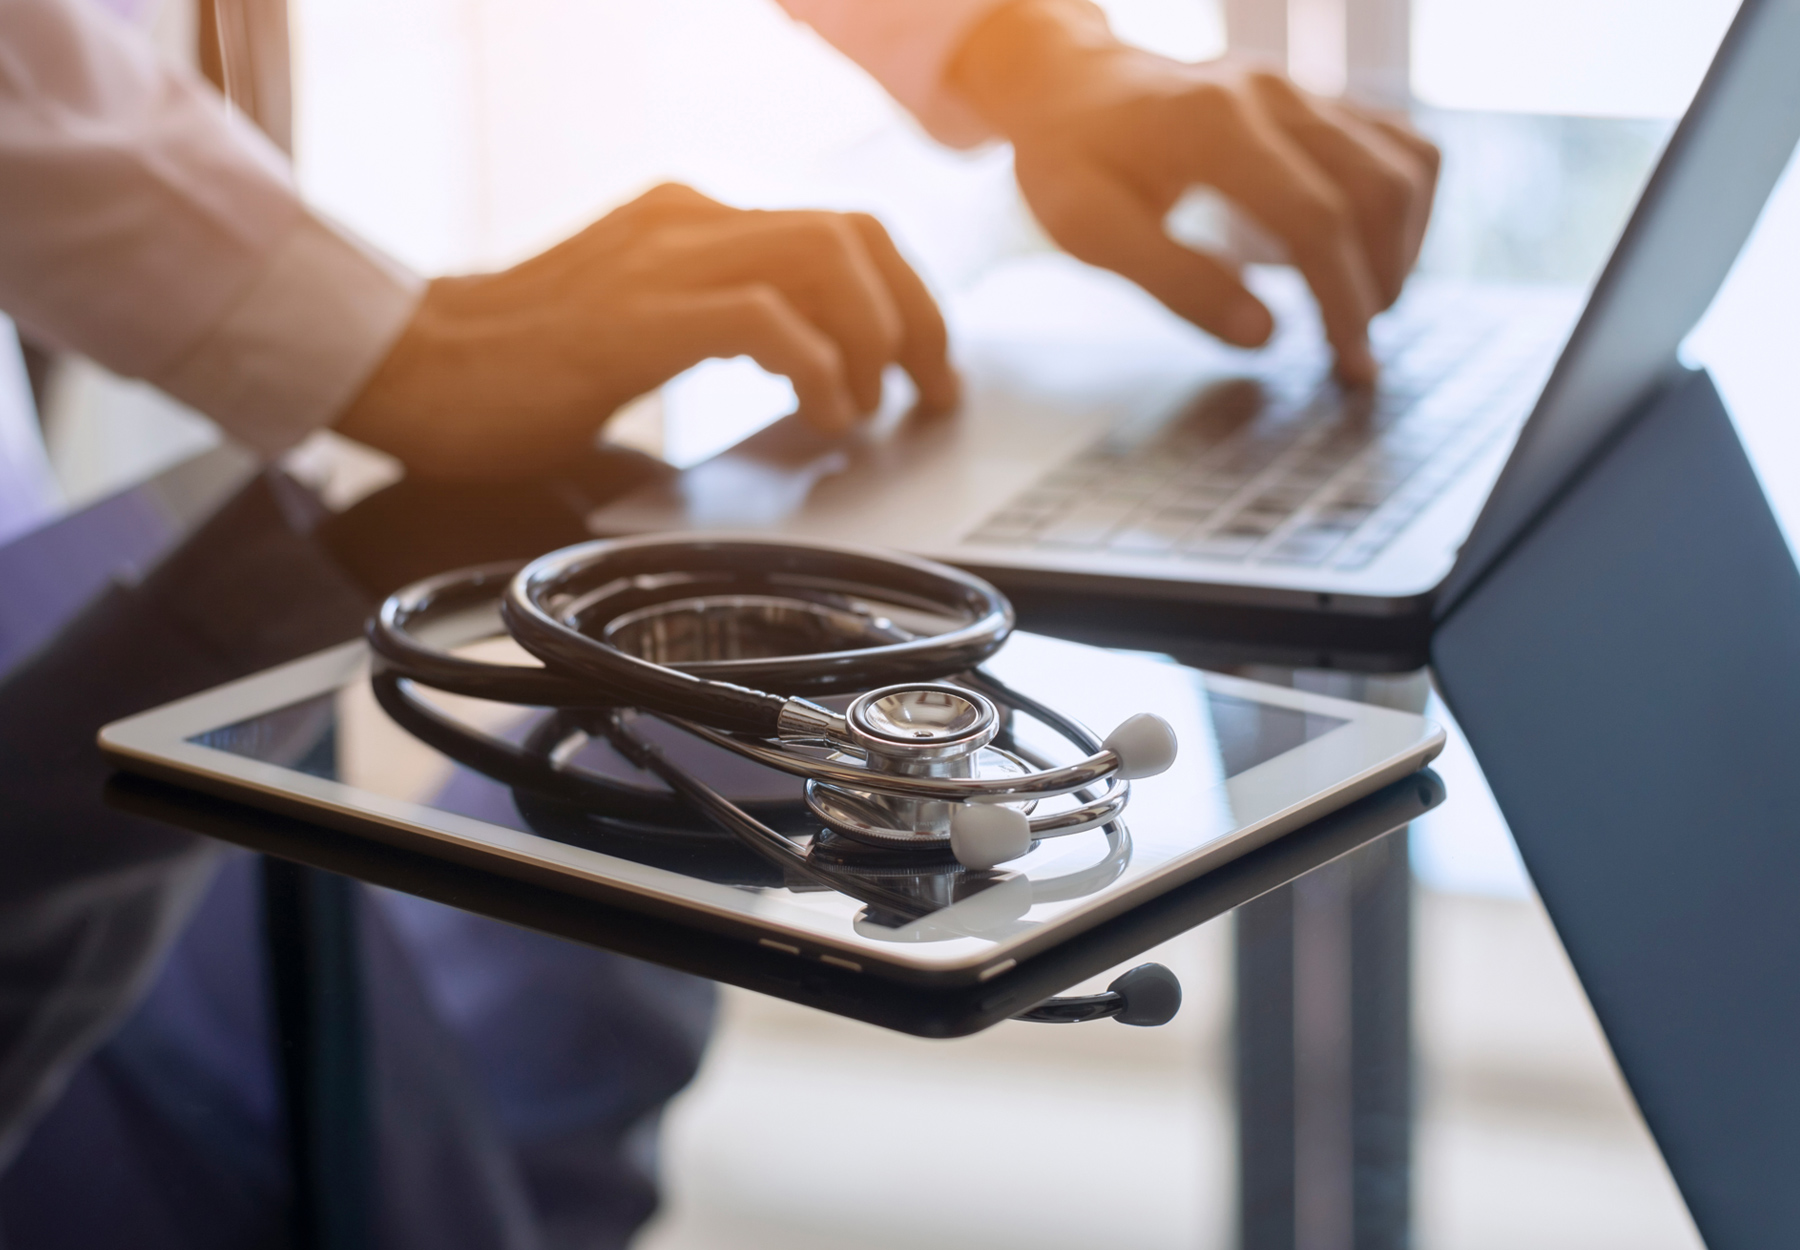 Closeup of doctor using a laptop with a tablet and stethoscope on the desk nearby. iStock image.